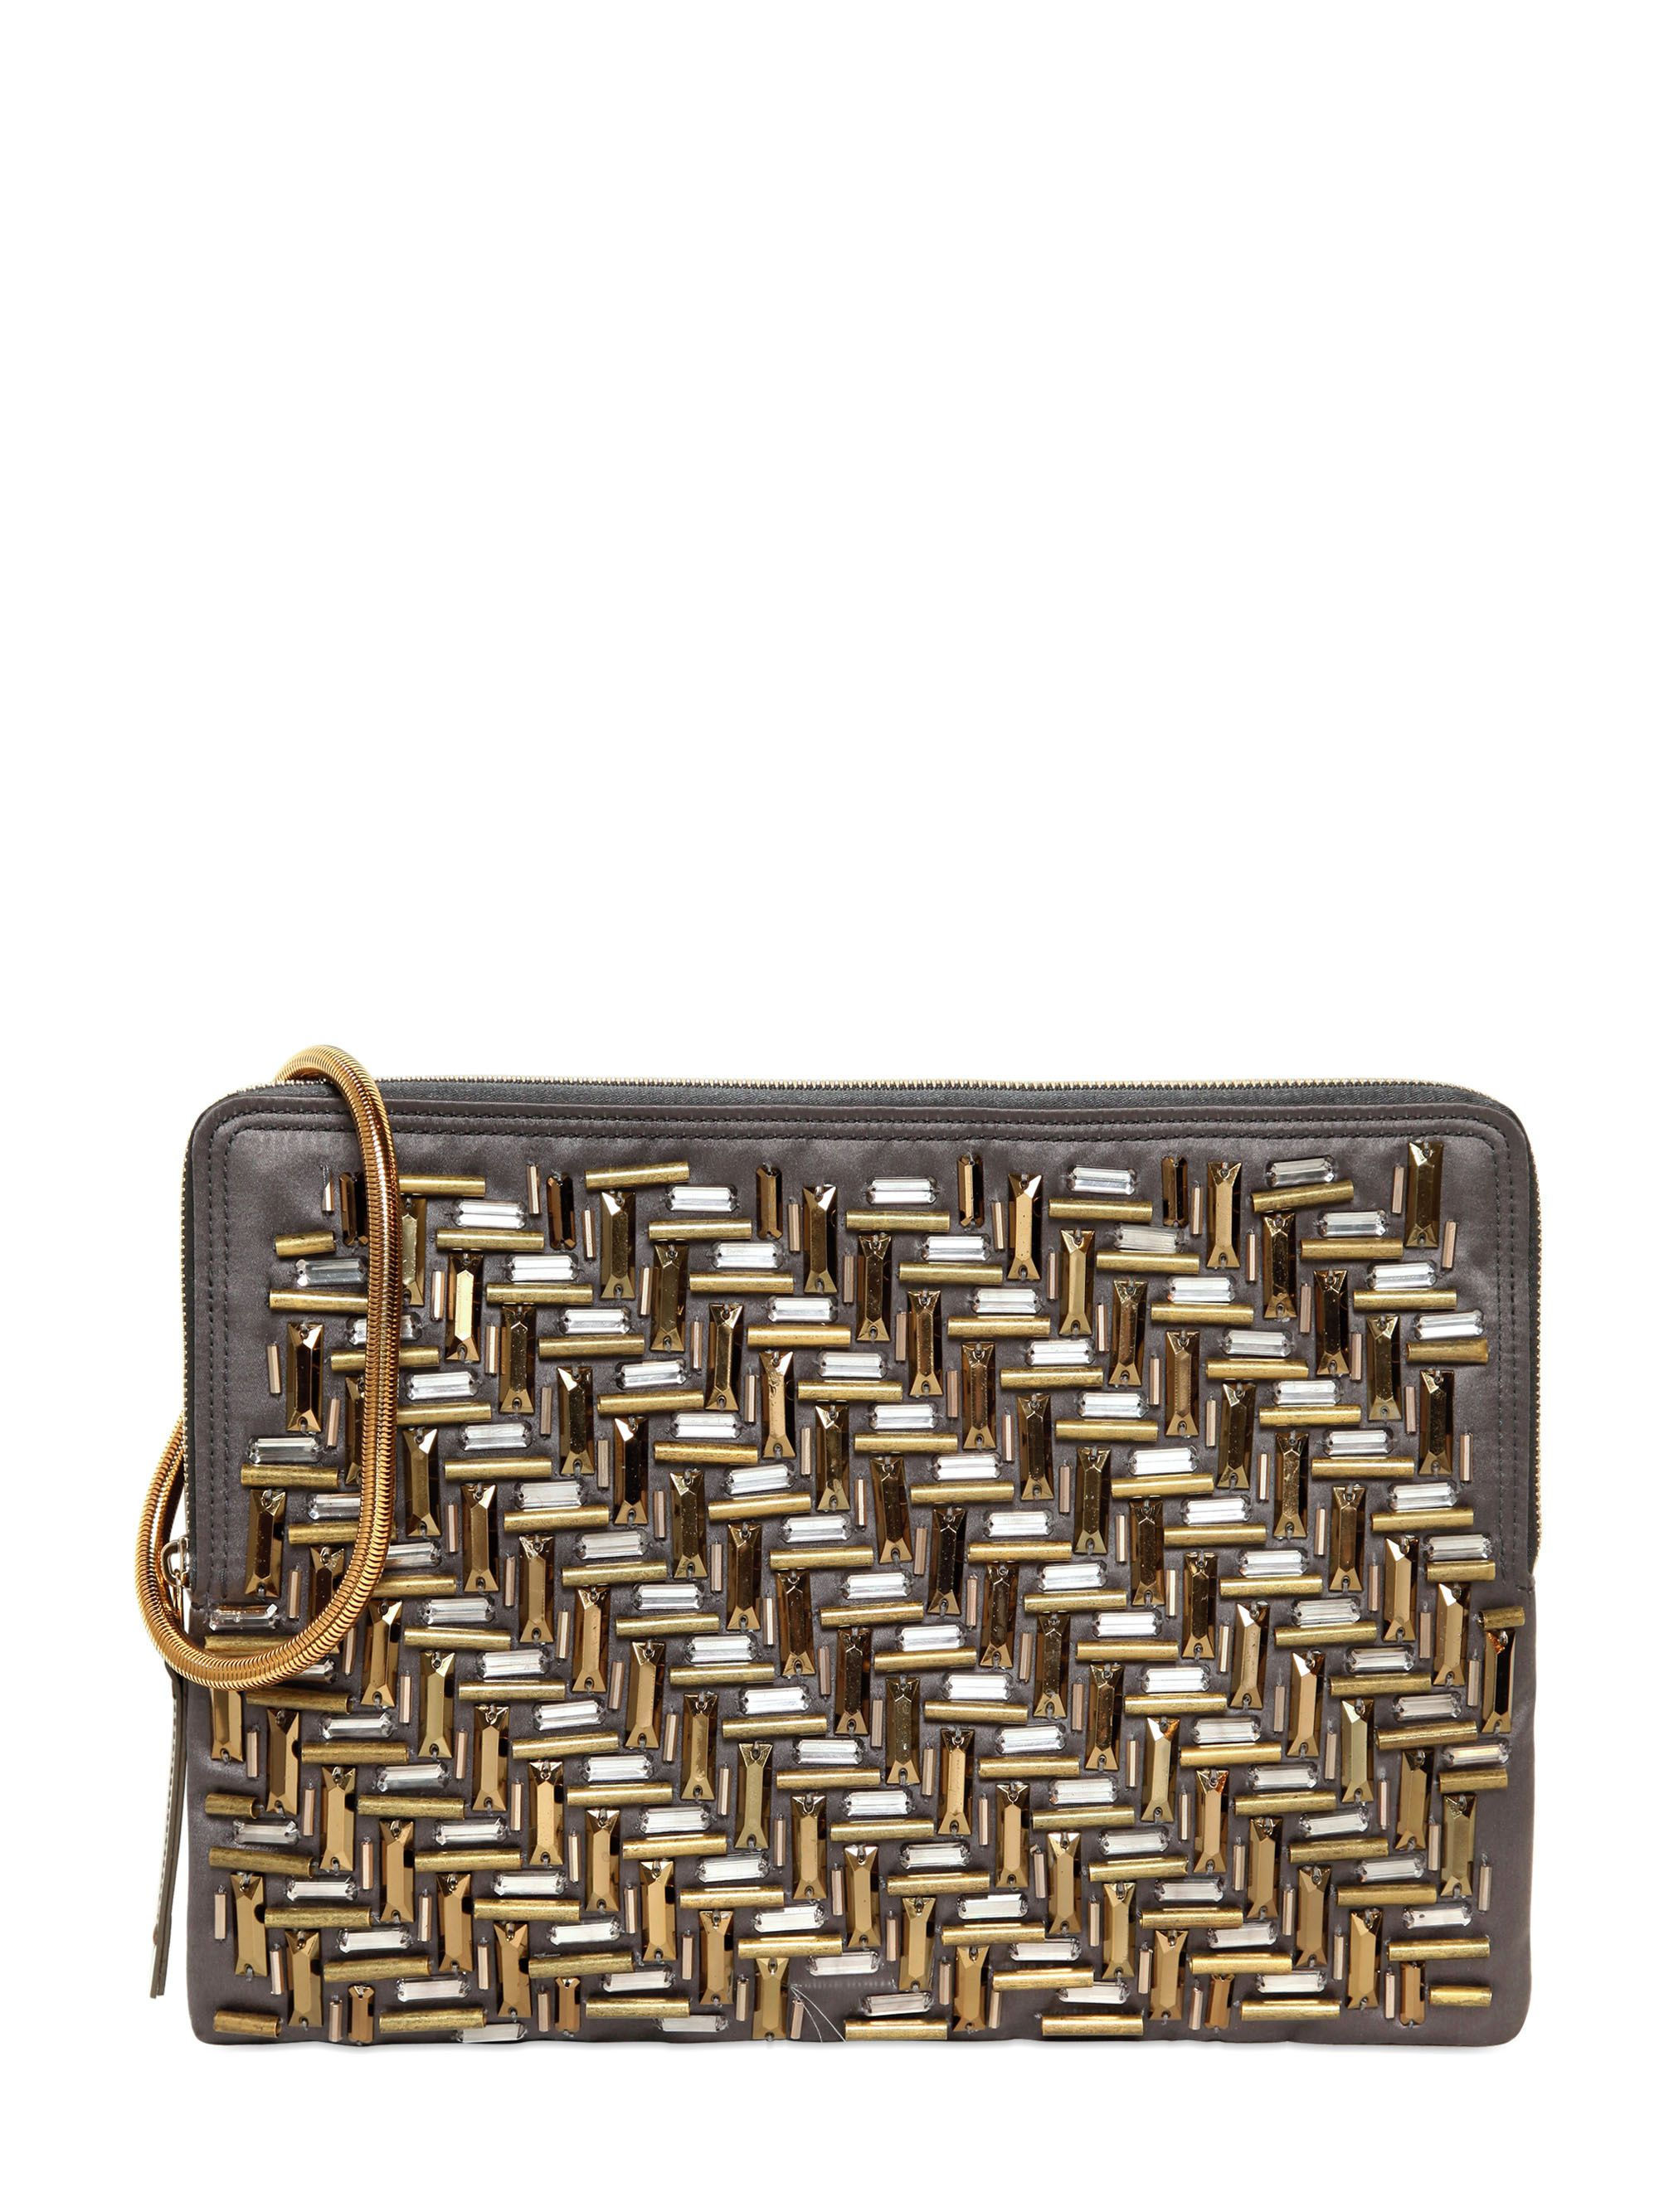 Lanvin Embroidered Satin Zipped Clutch in Metallic | Lyst